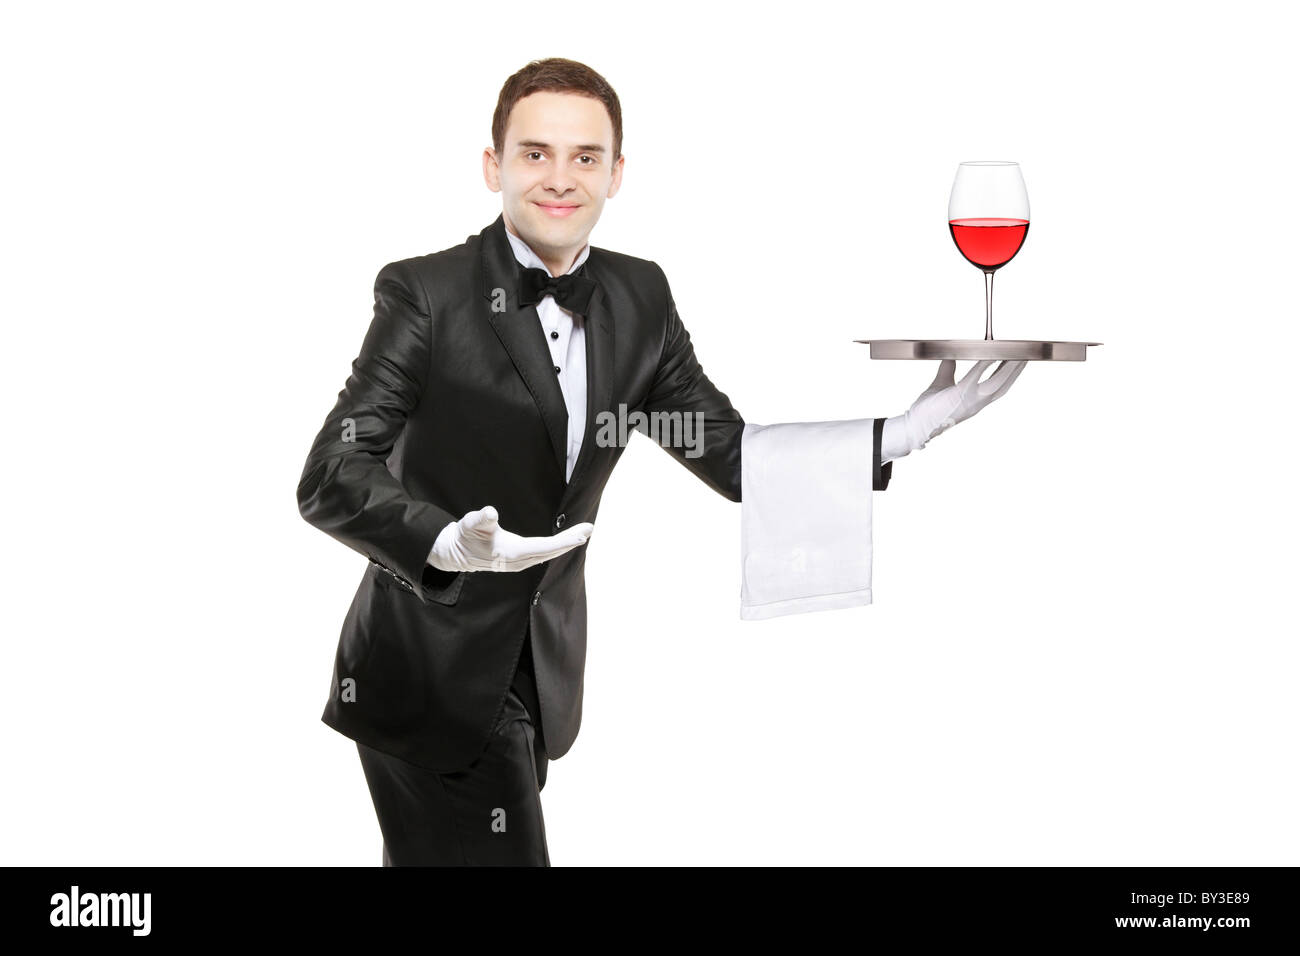 man hold wine glass, bearded guy in office style clothes at restaurant,  sommelier near woman in mirror Stock Photo - Alamy